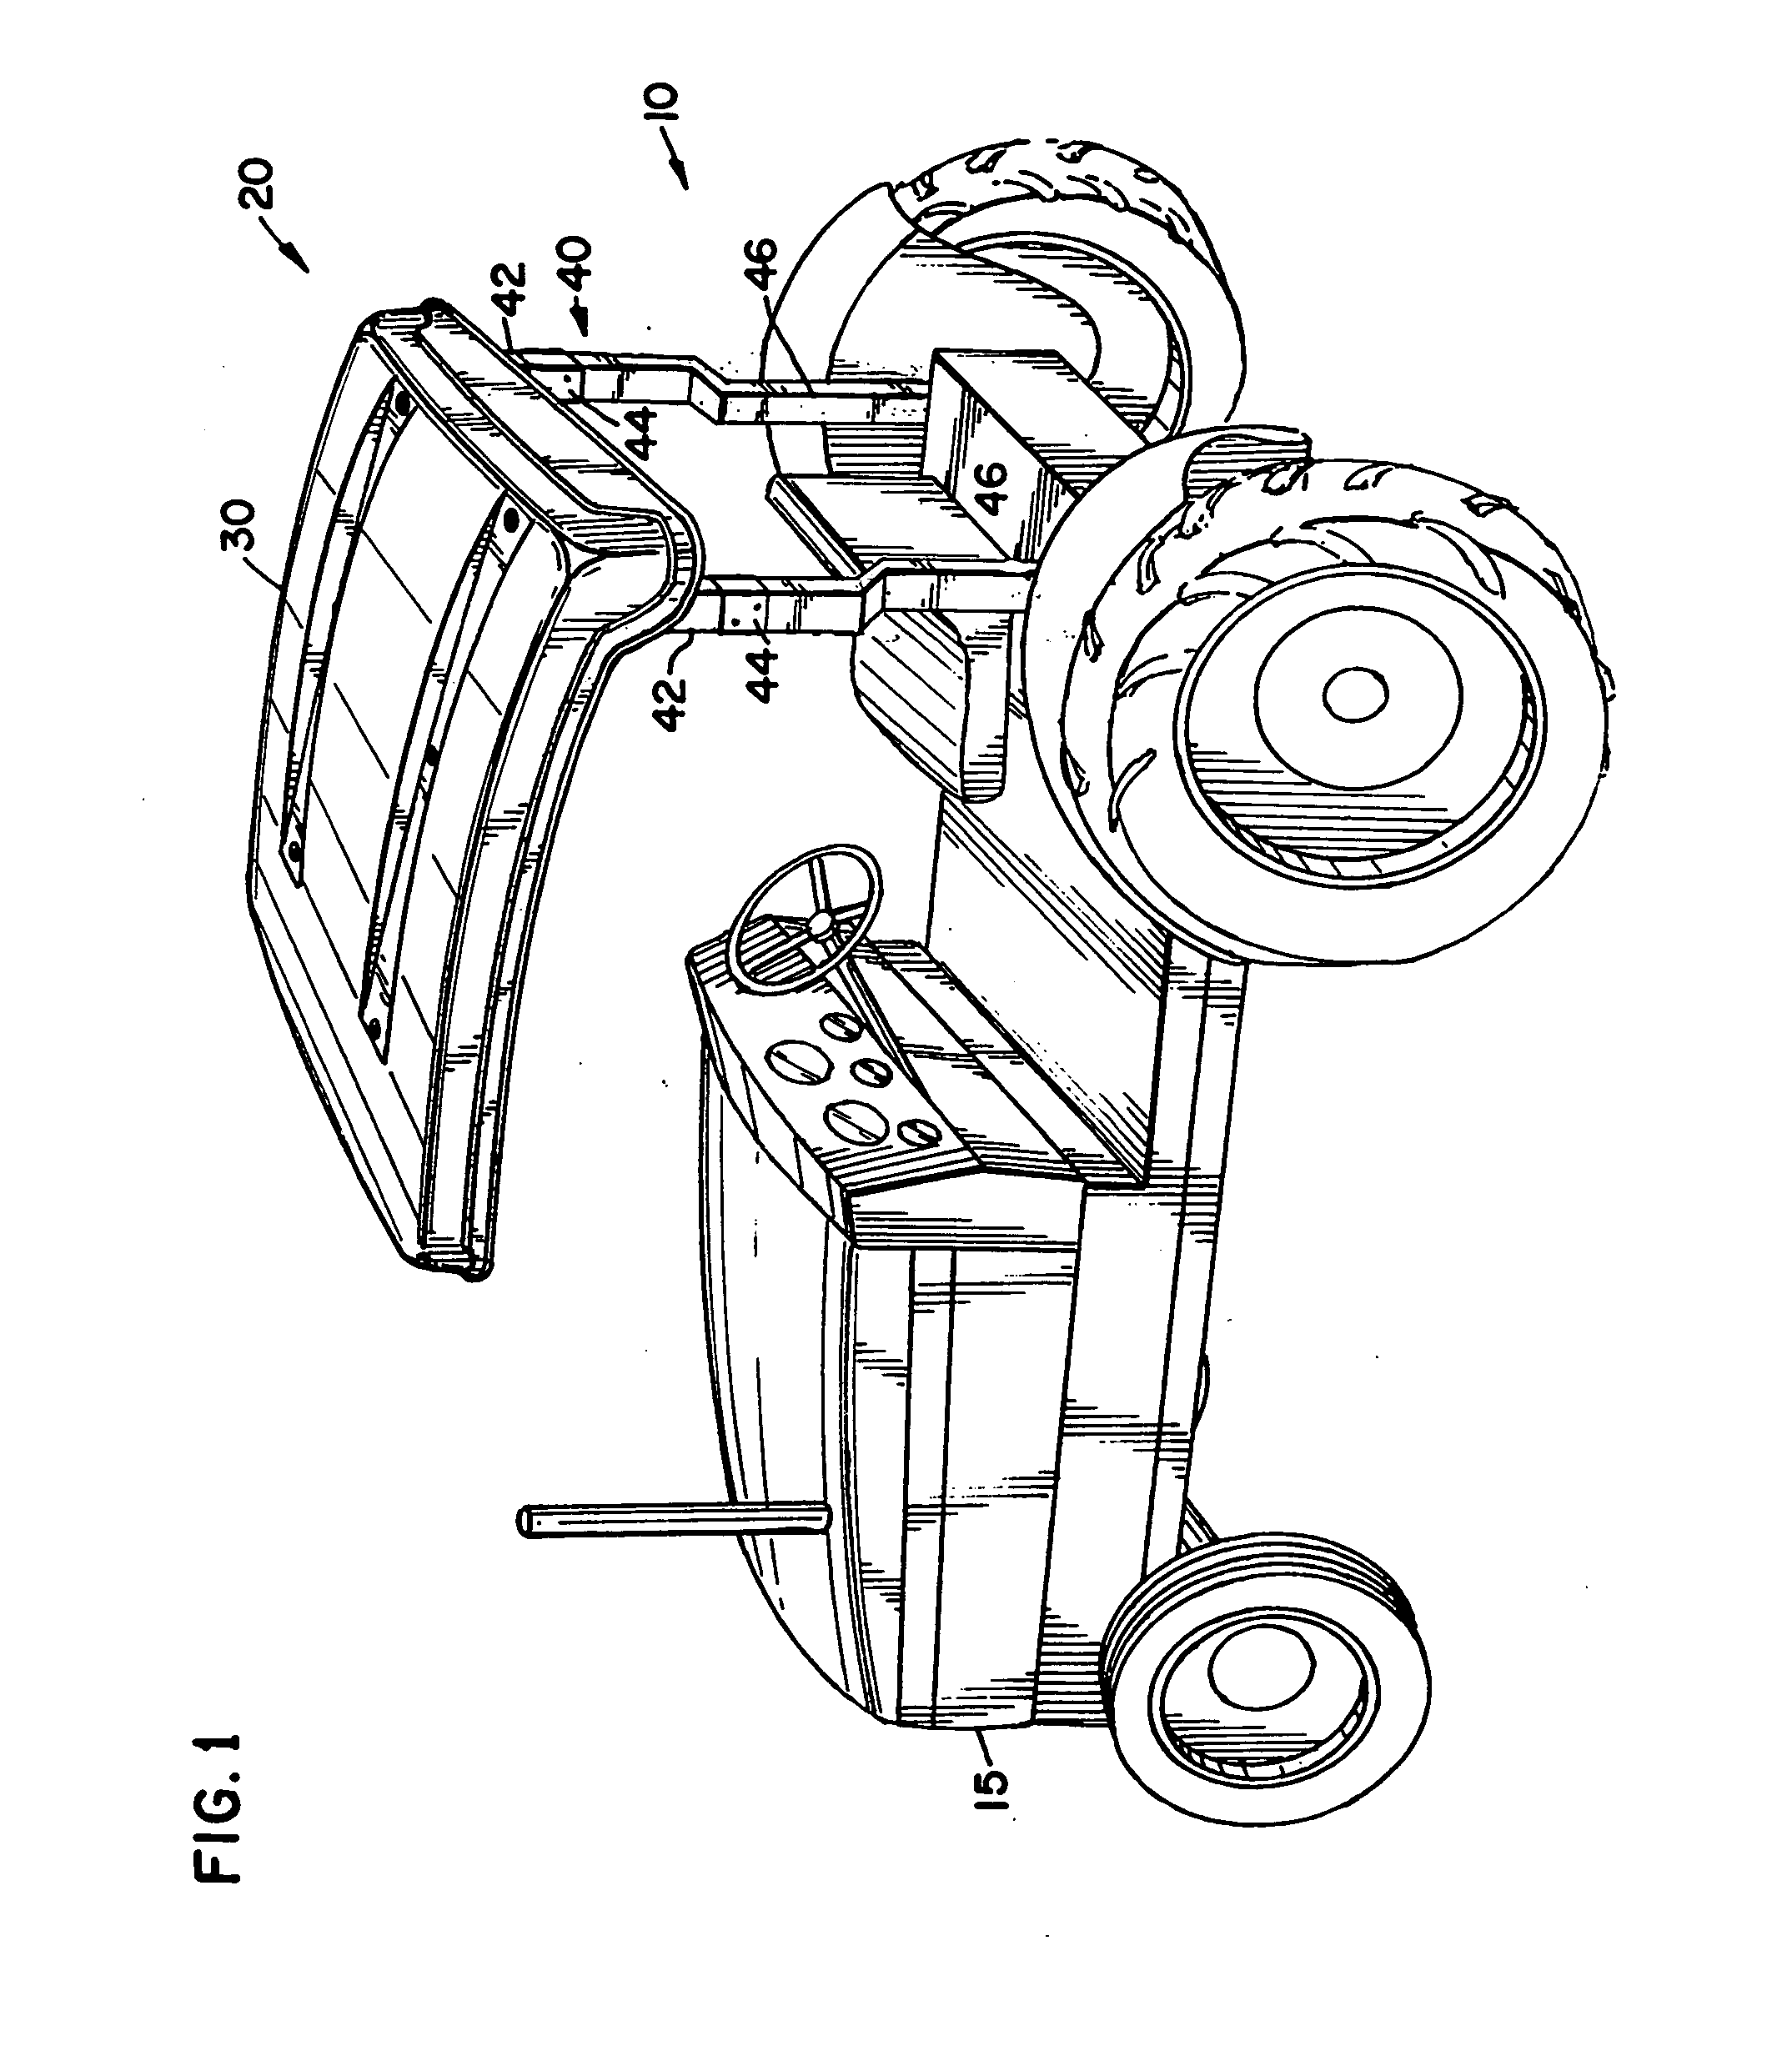 Tractor, a canopy assembly, and a method for attaching a canopy assembly to a tractor